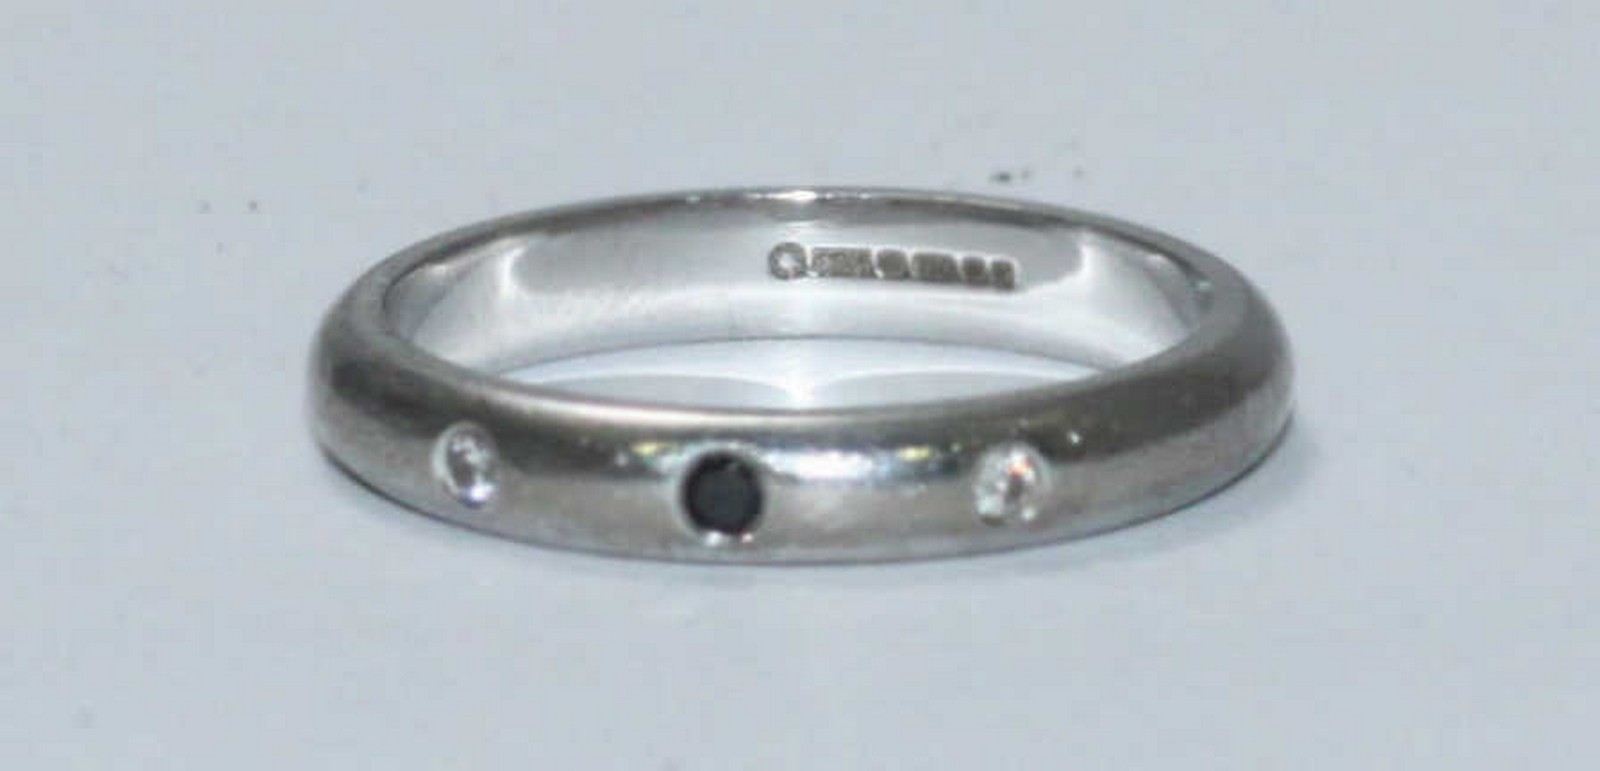 An 18ct white gold wedding ring, the band set with a small black diamond flanked by two small